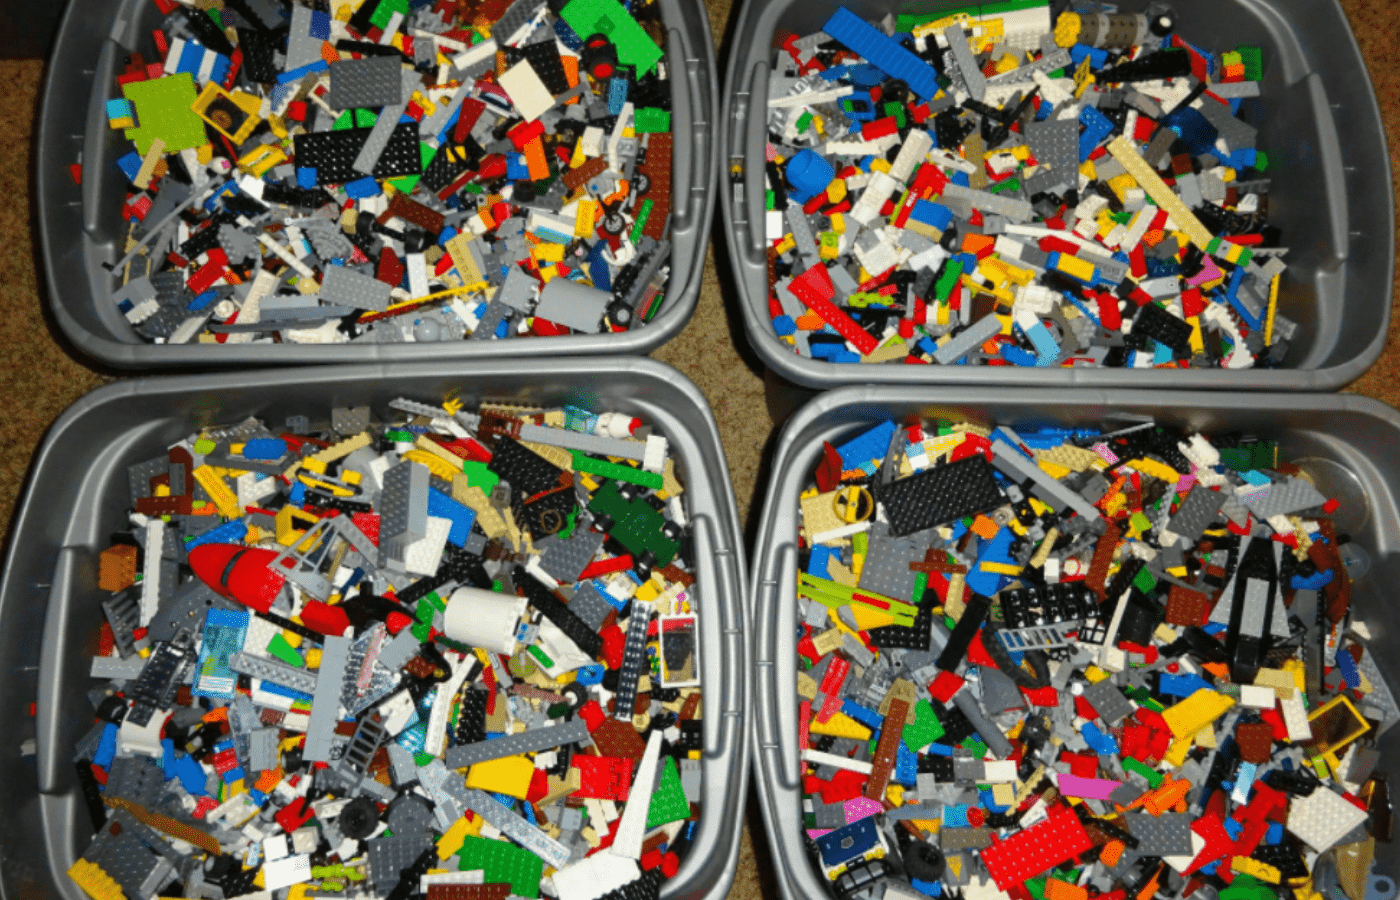 How Much Does 1 Pound of Legos Cost